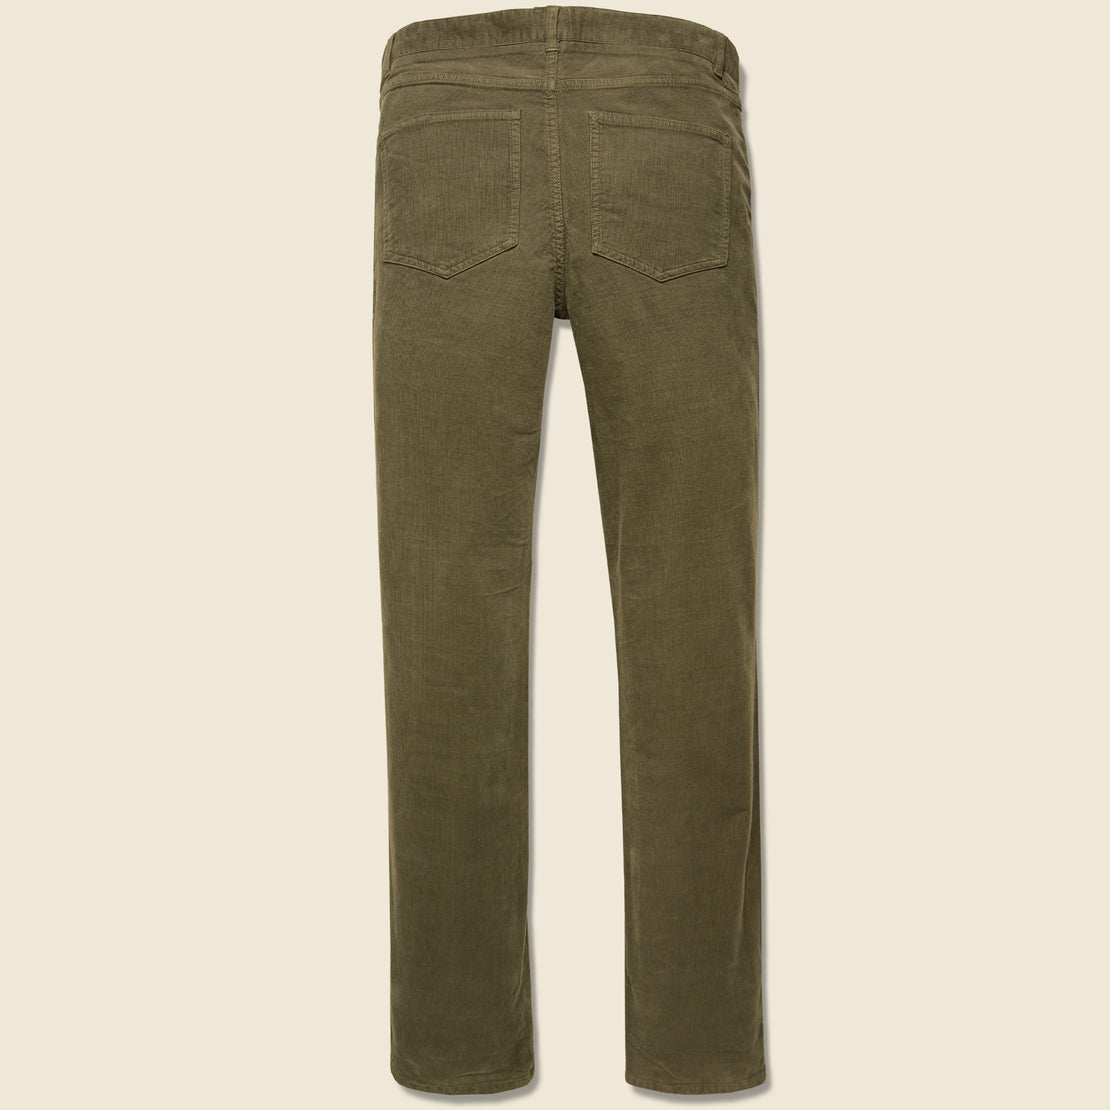 Stretch Corduroy Pant - Timber - Faherty - STAG Provisions - Pants - Corduroy